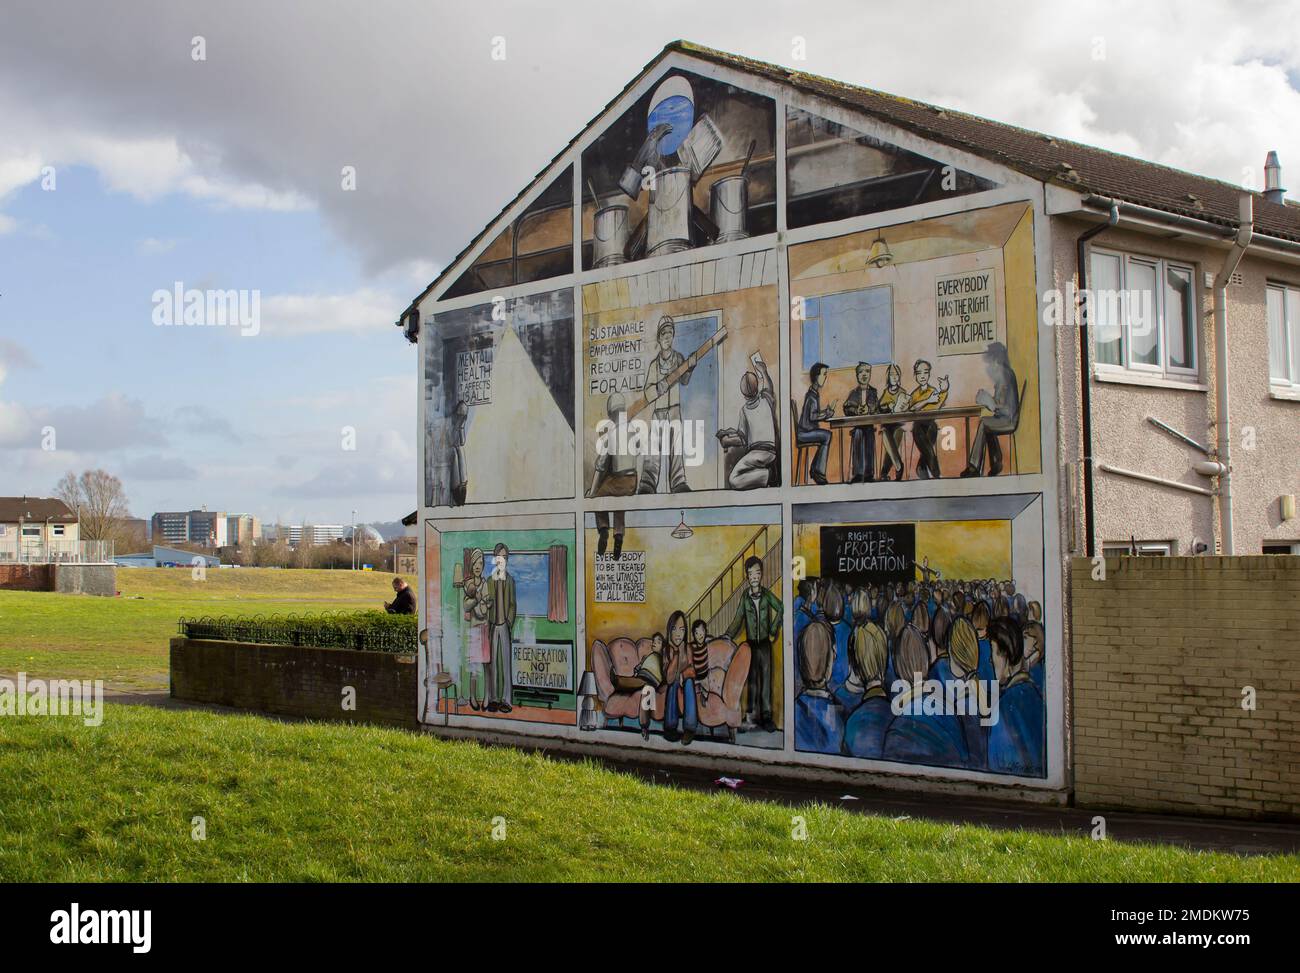 21 Feb 18 A painted mural on a Gable wall in the Council Housing Estate in the Petershill area of the Lower Shankill Road in Belfast Northern Ireland Stock Photo